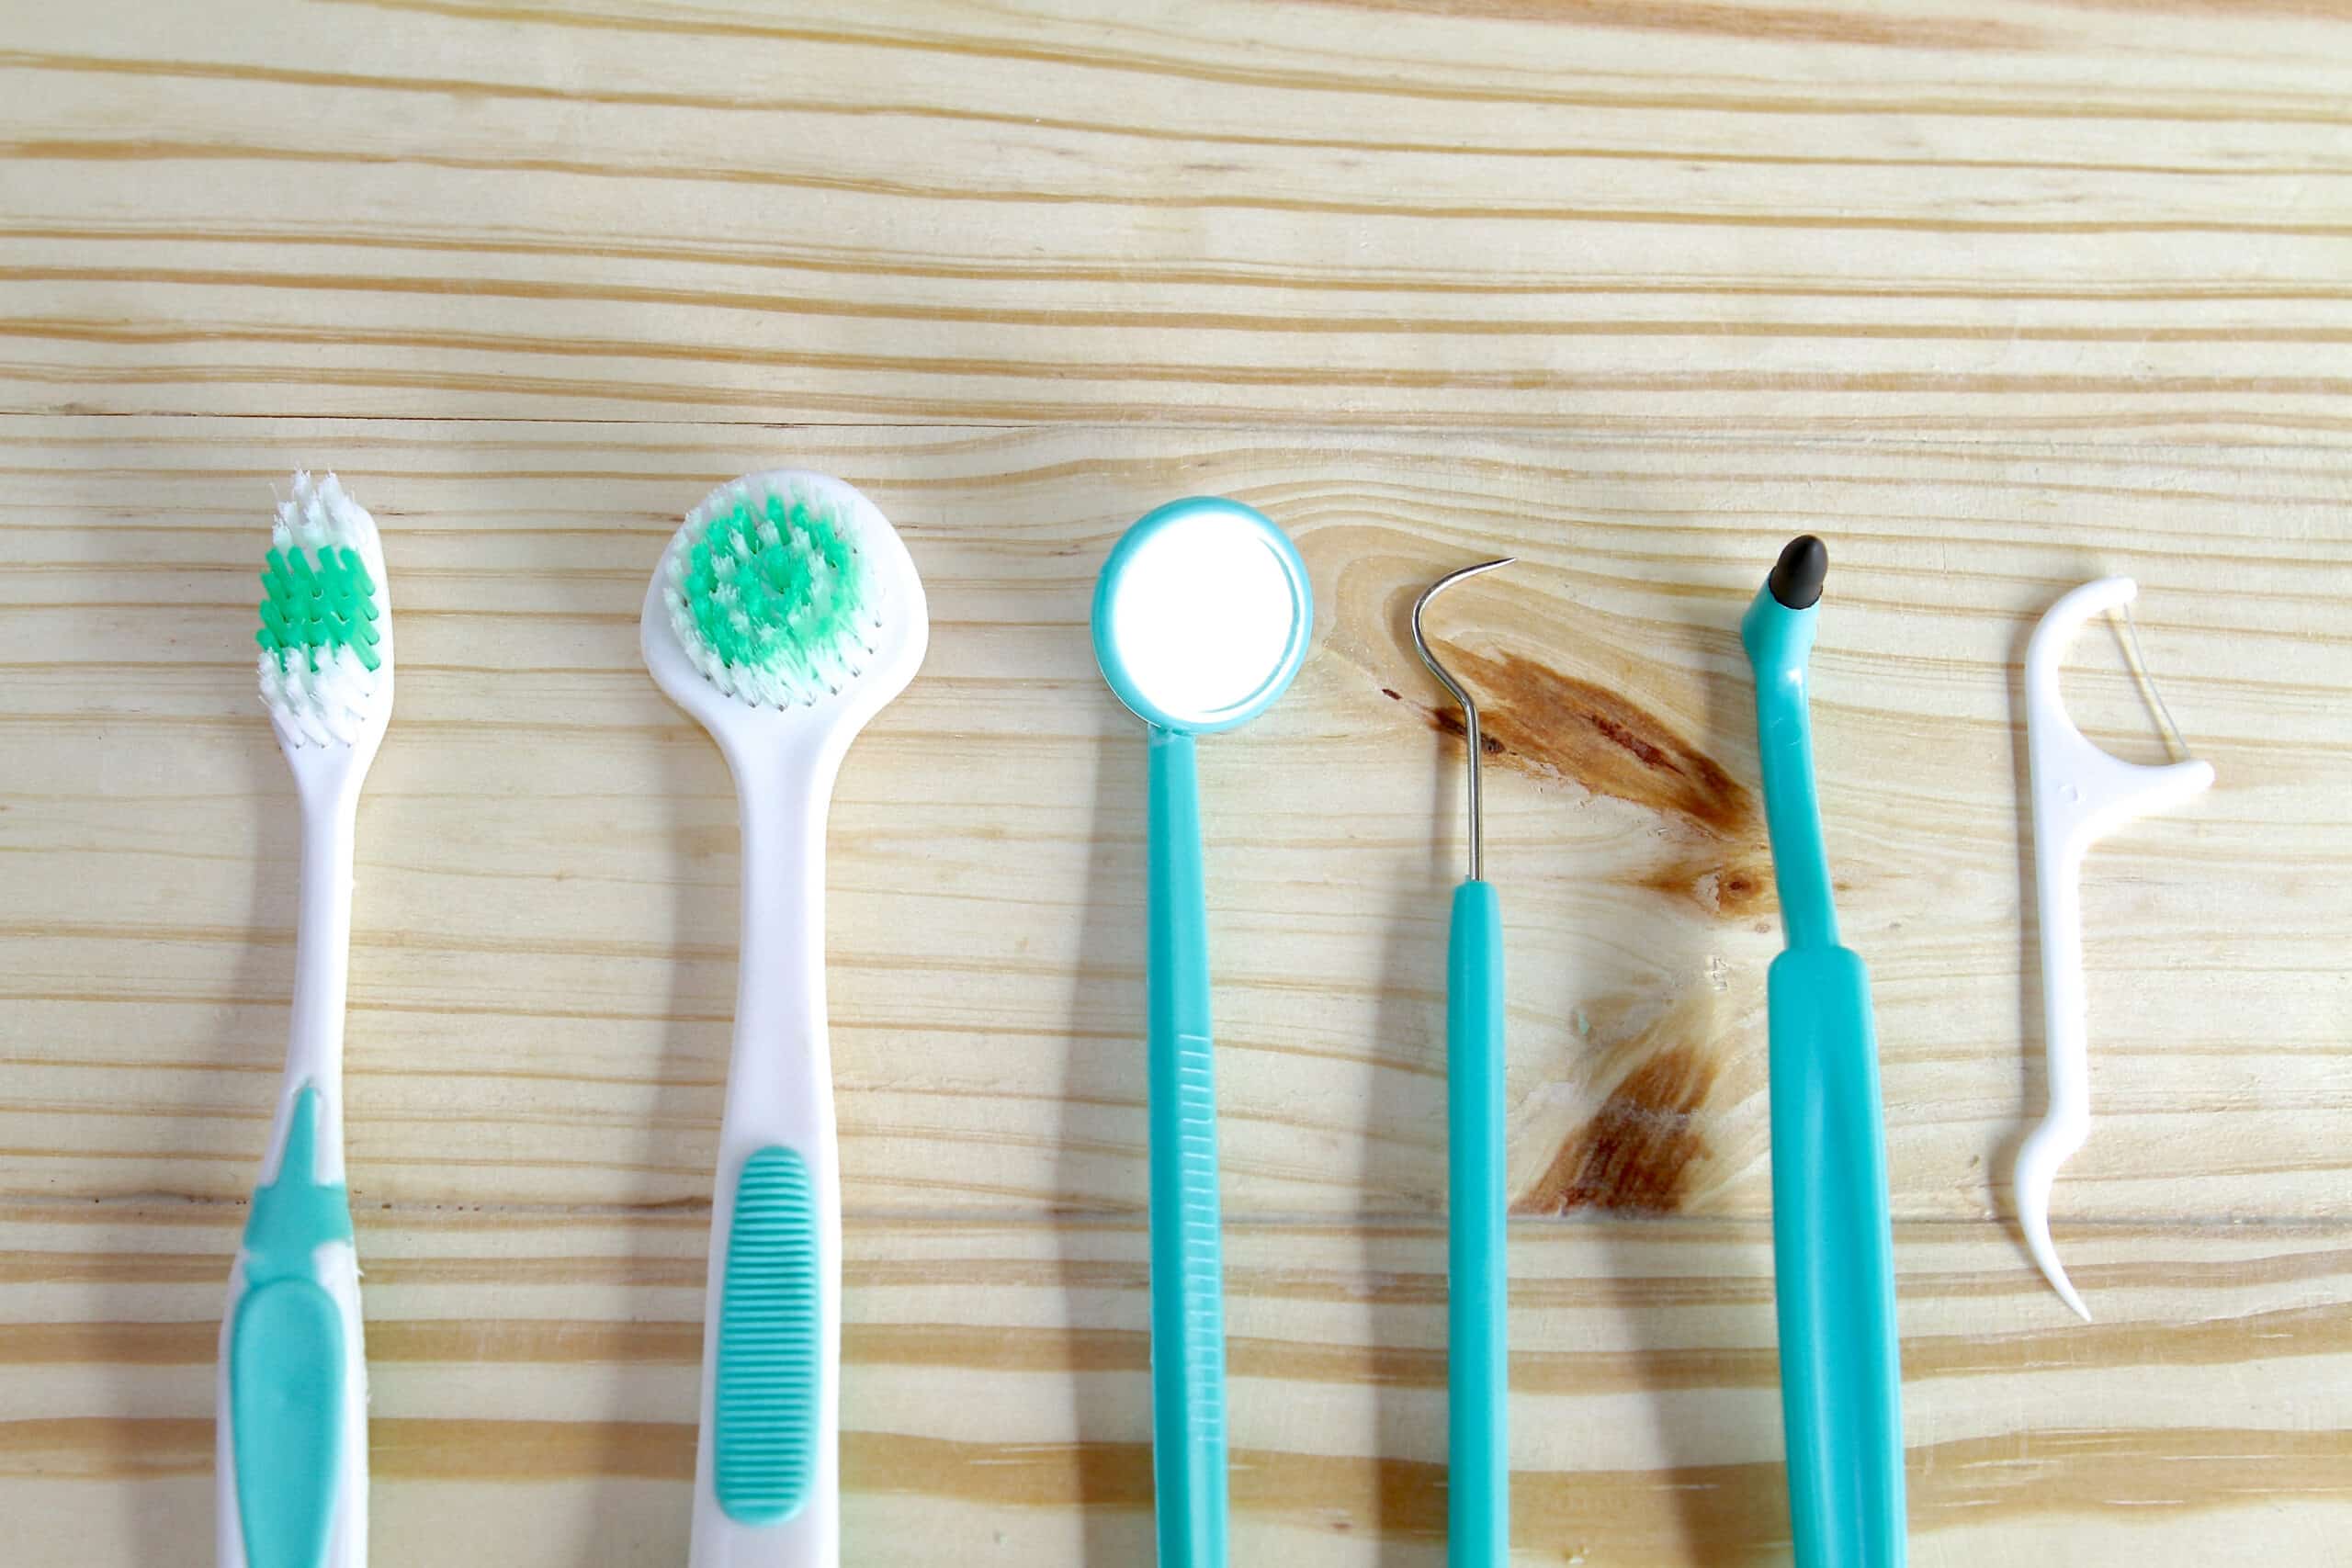 Safety Measures When Using Dental Tools at Home